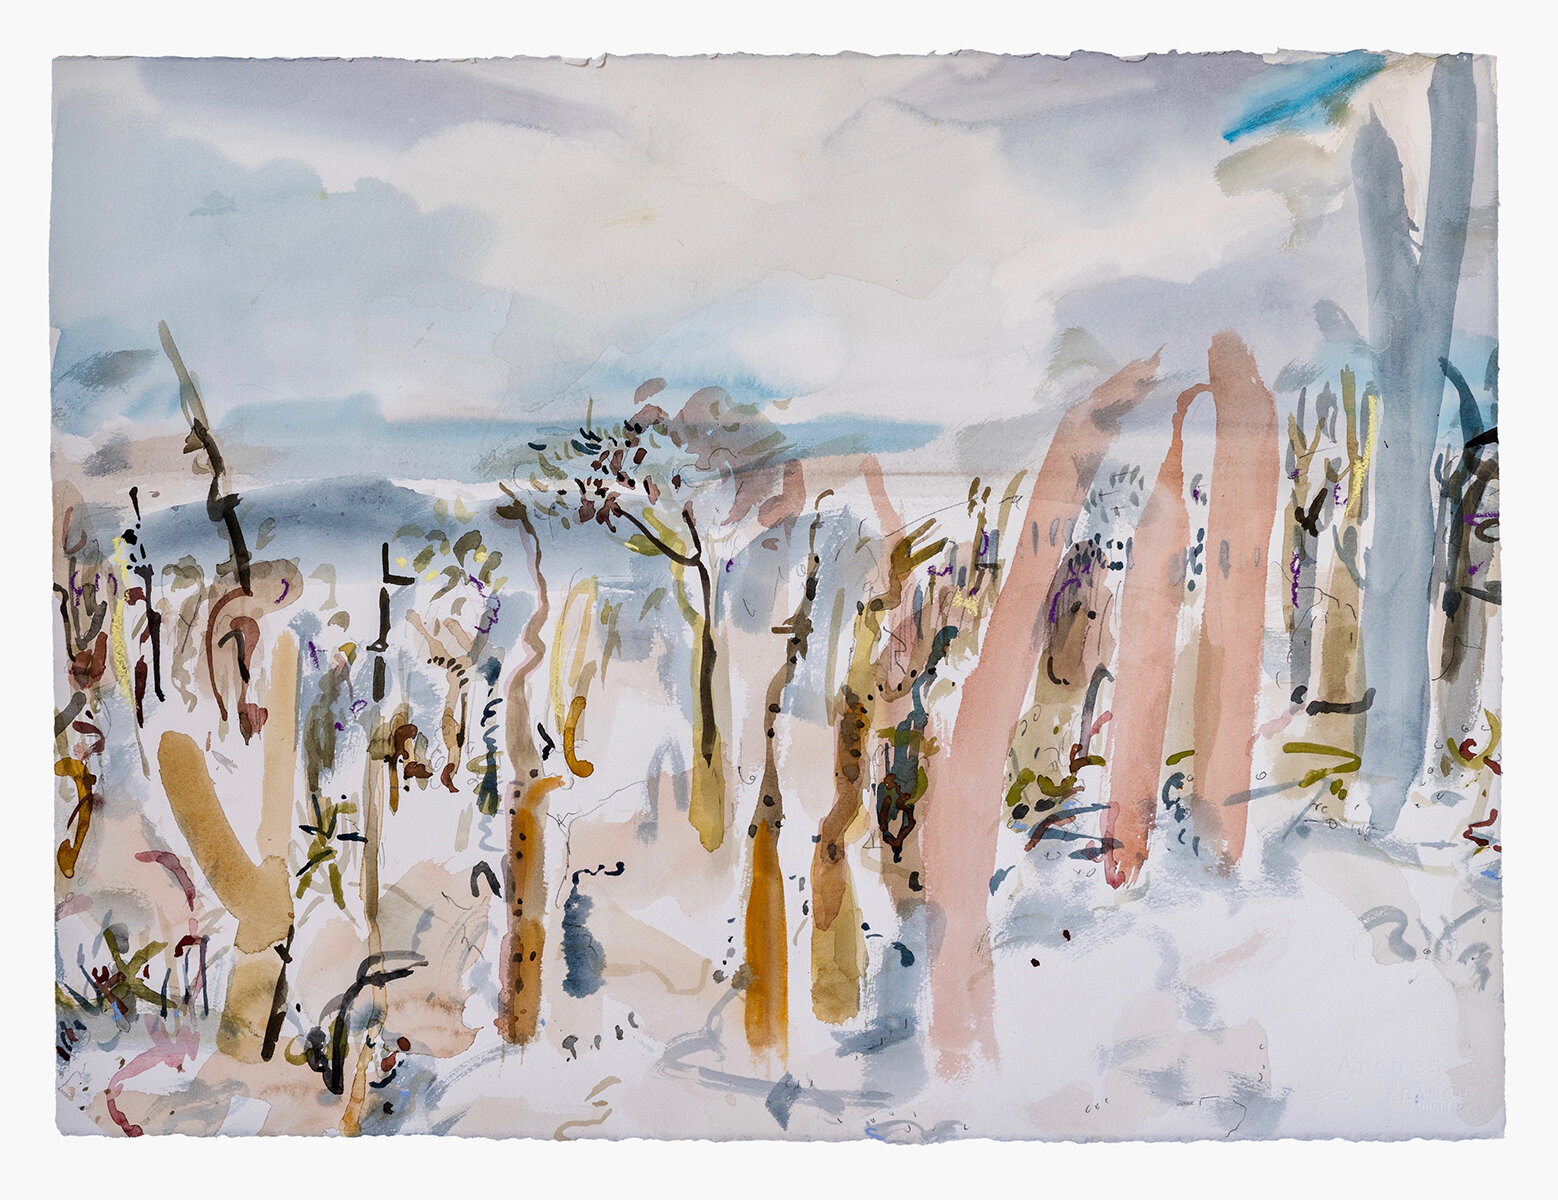   Wandoo Blue Mountain,  2021   Watercolour and pastel on arches paper, 57 x 76 cm Private Collection 